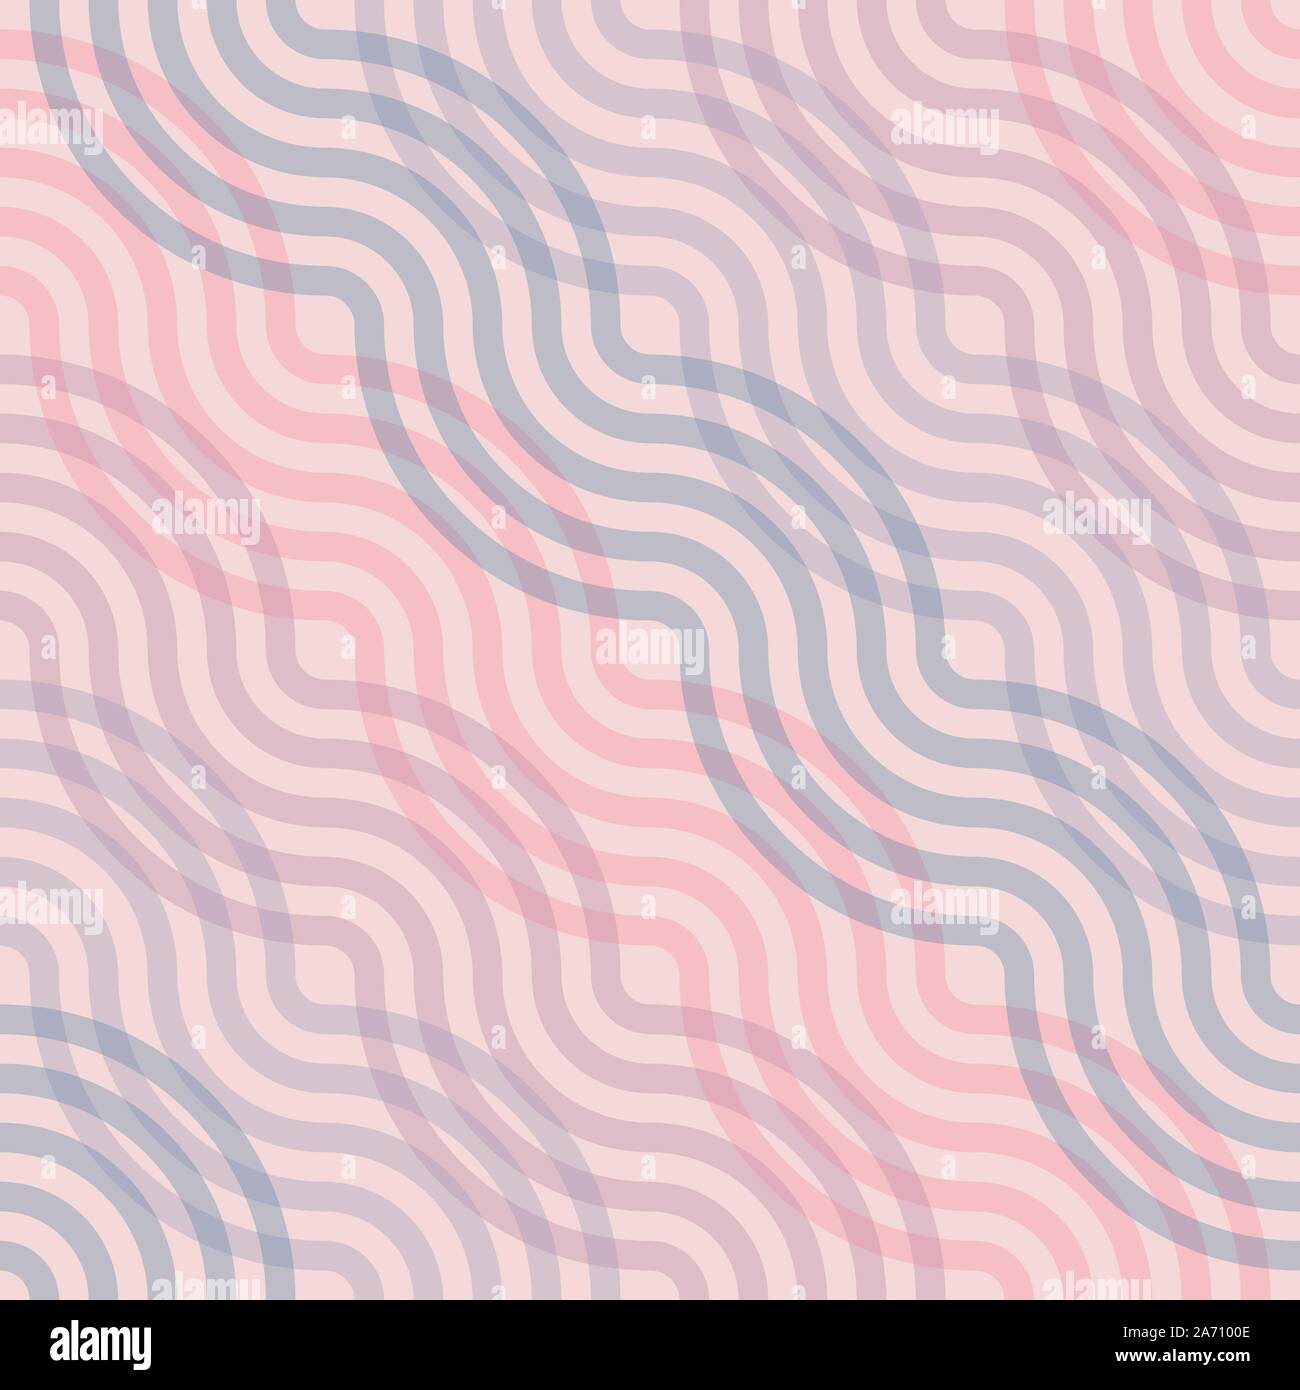 Seamless geometry of  pattern in a modern, stylish, and minimal fashion. The abstract tiles can be repeated endlessly. Stock Vector